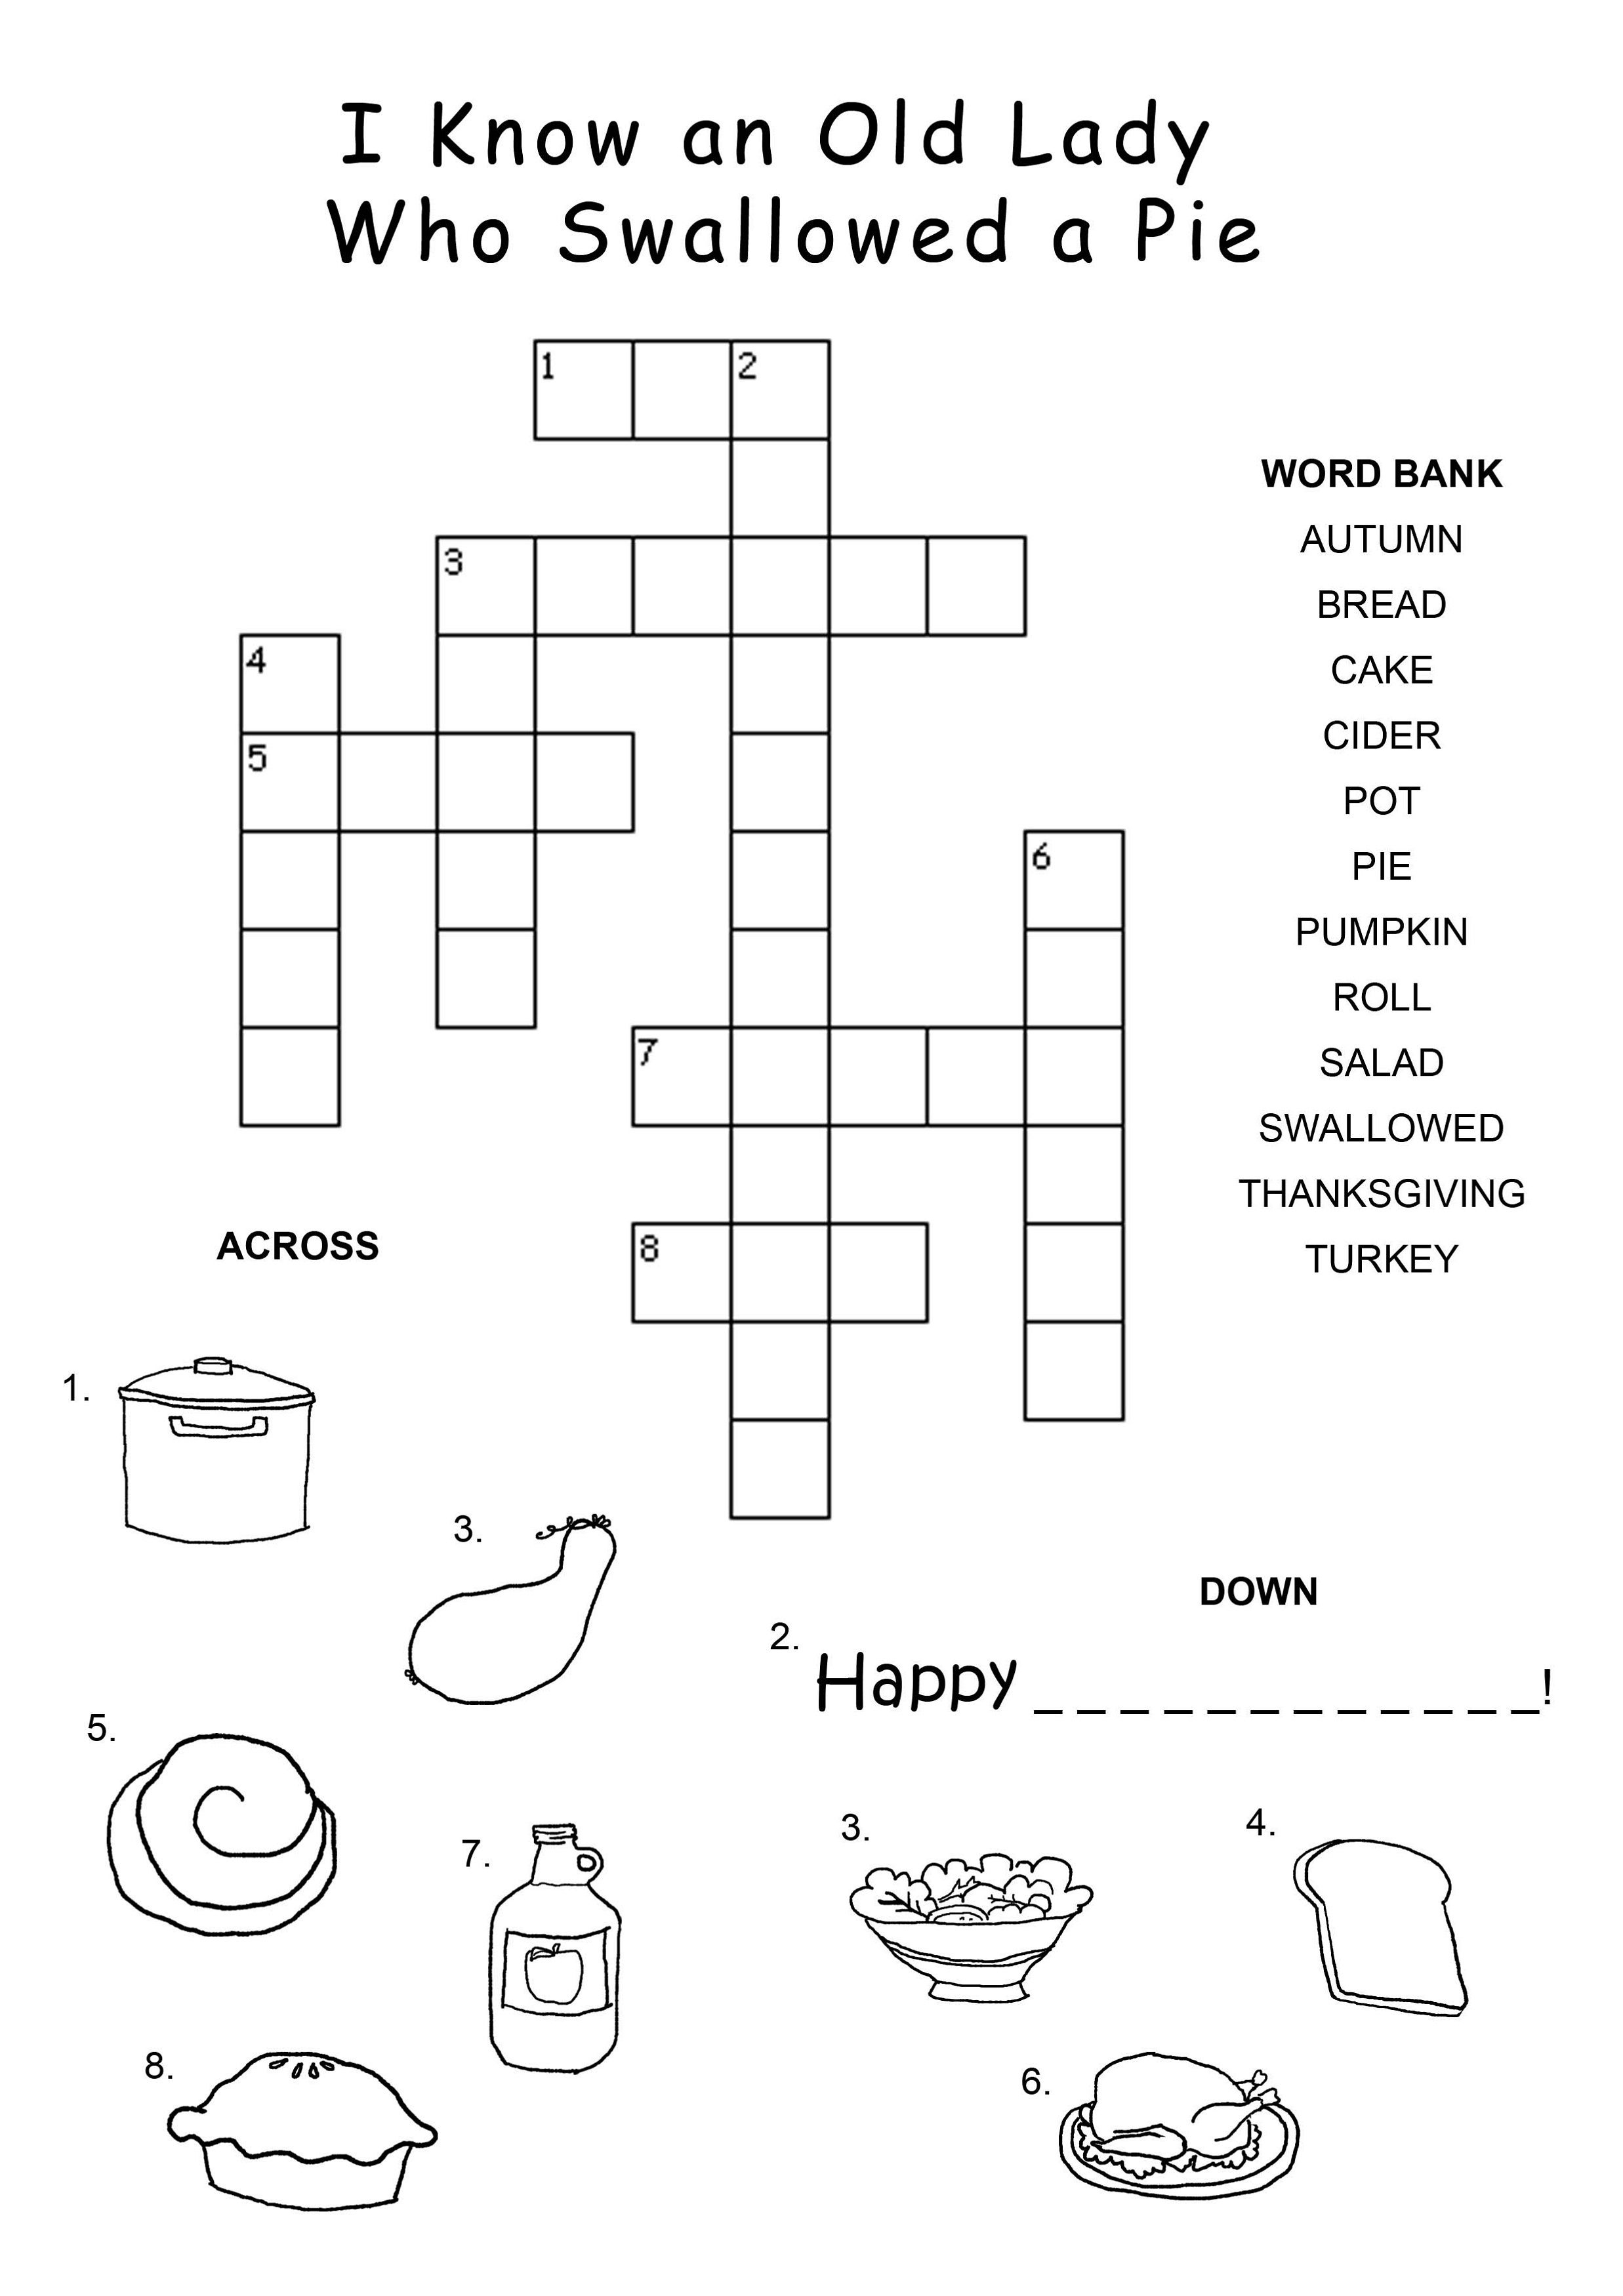 Easy Thanksgiving Crossword Puzzles For Kids | Kiddo Shelter - Easy Crossword Puzzles Printable For Kids